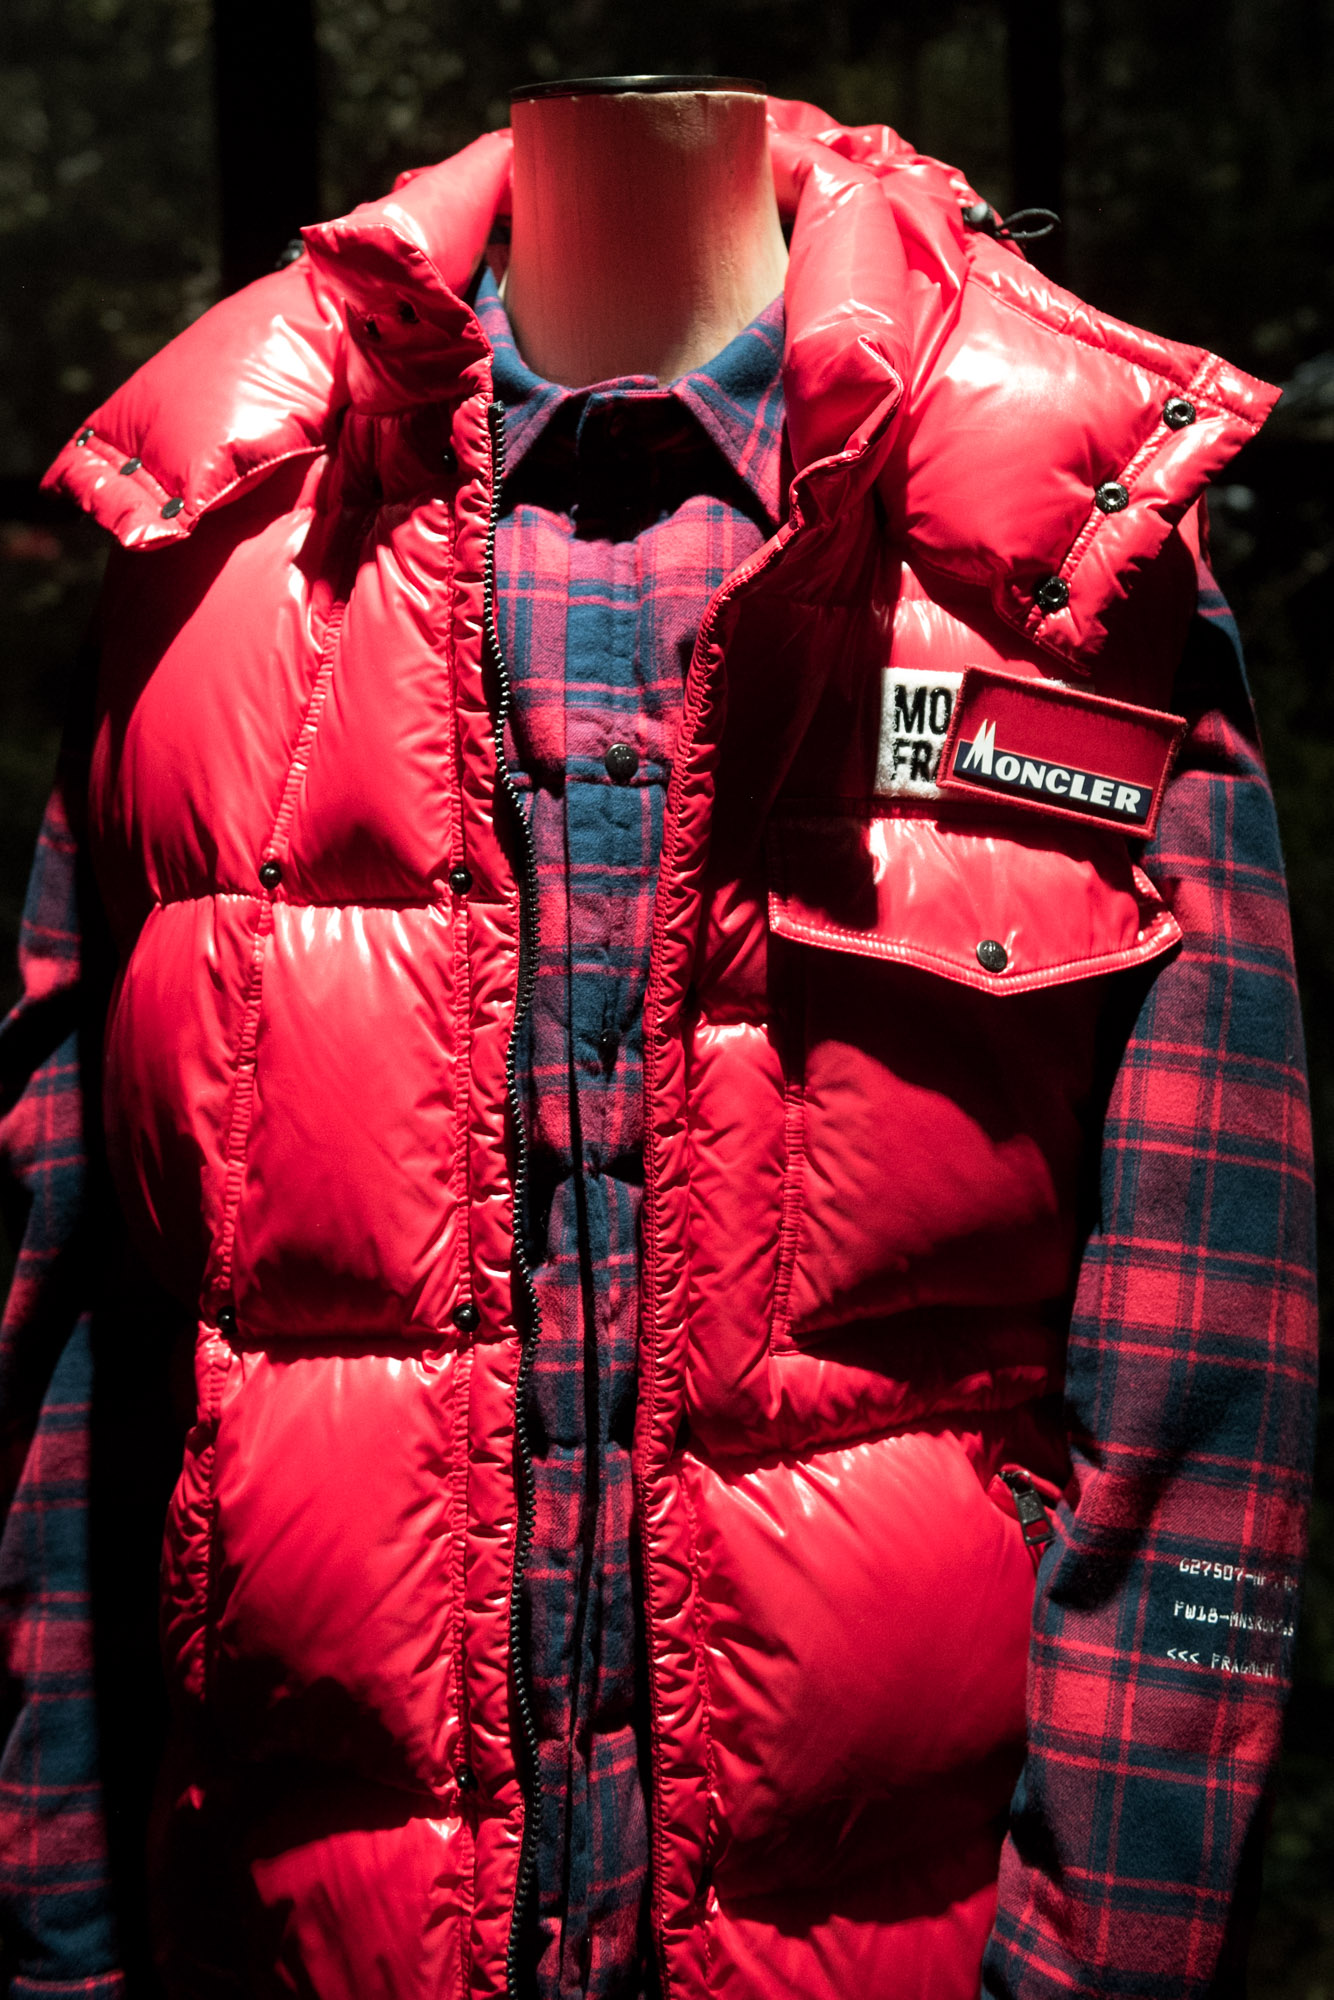 Follow HF's BACKSTAGE for MONCLER FRAGMENT / RoC Staff / Ring of